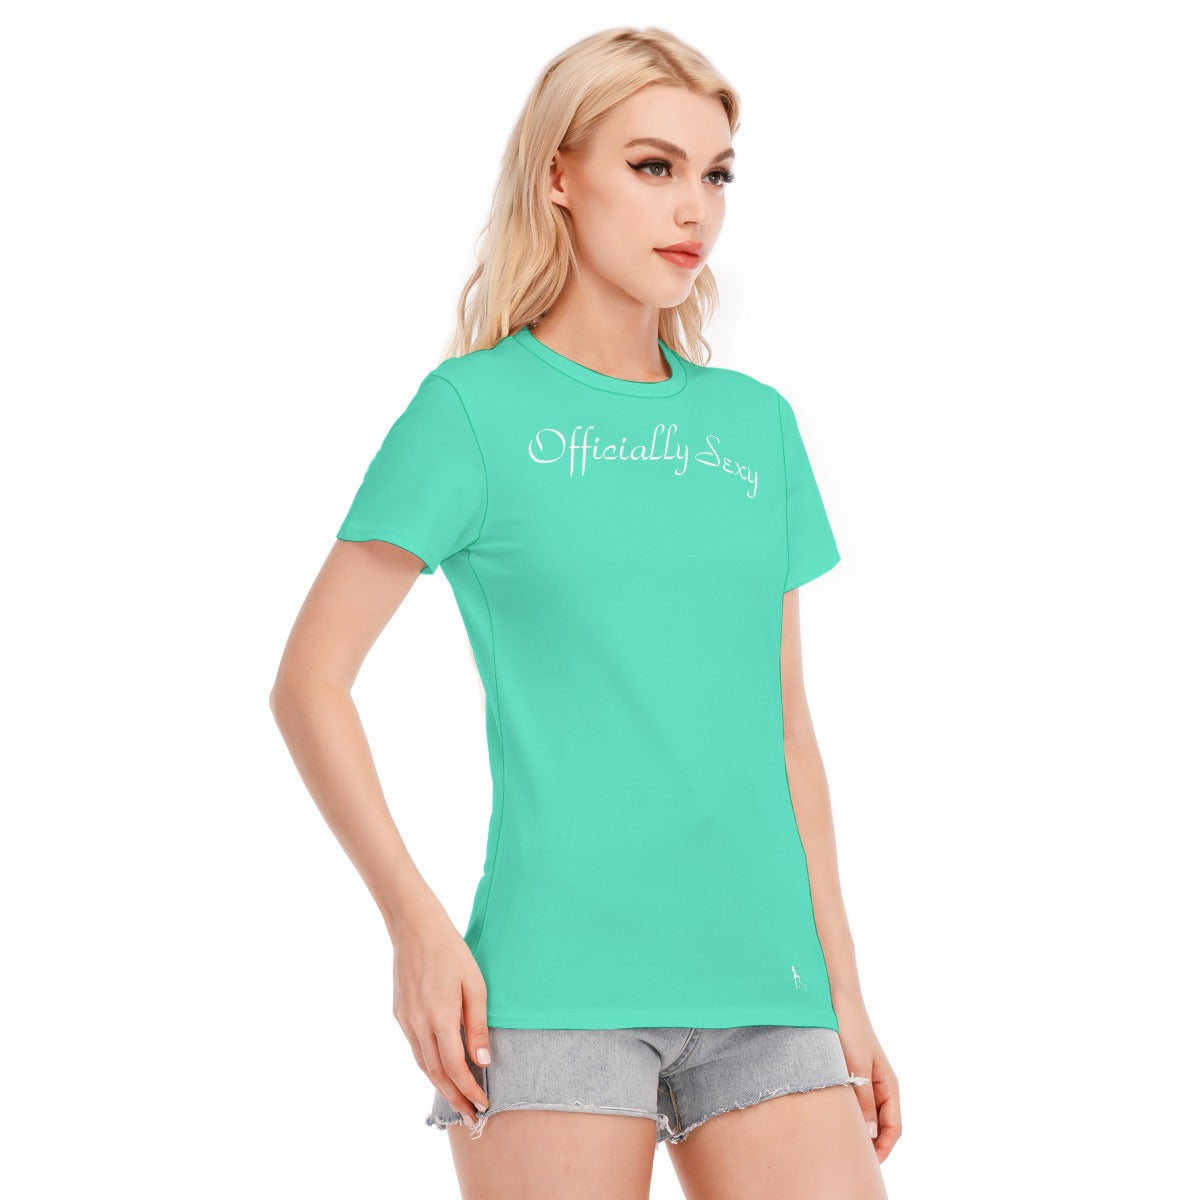 👚 Officially Sexy Turquoise Green With White Logo Women's Round Neck T-Shirt | 190GSM CottonColor #50E3C2 👚